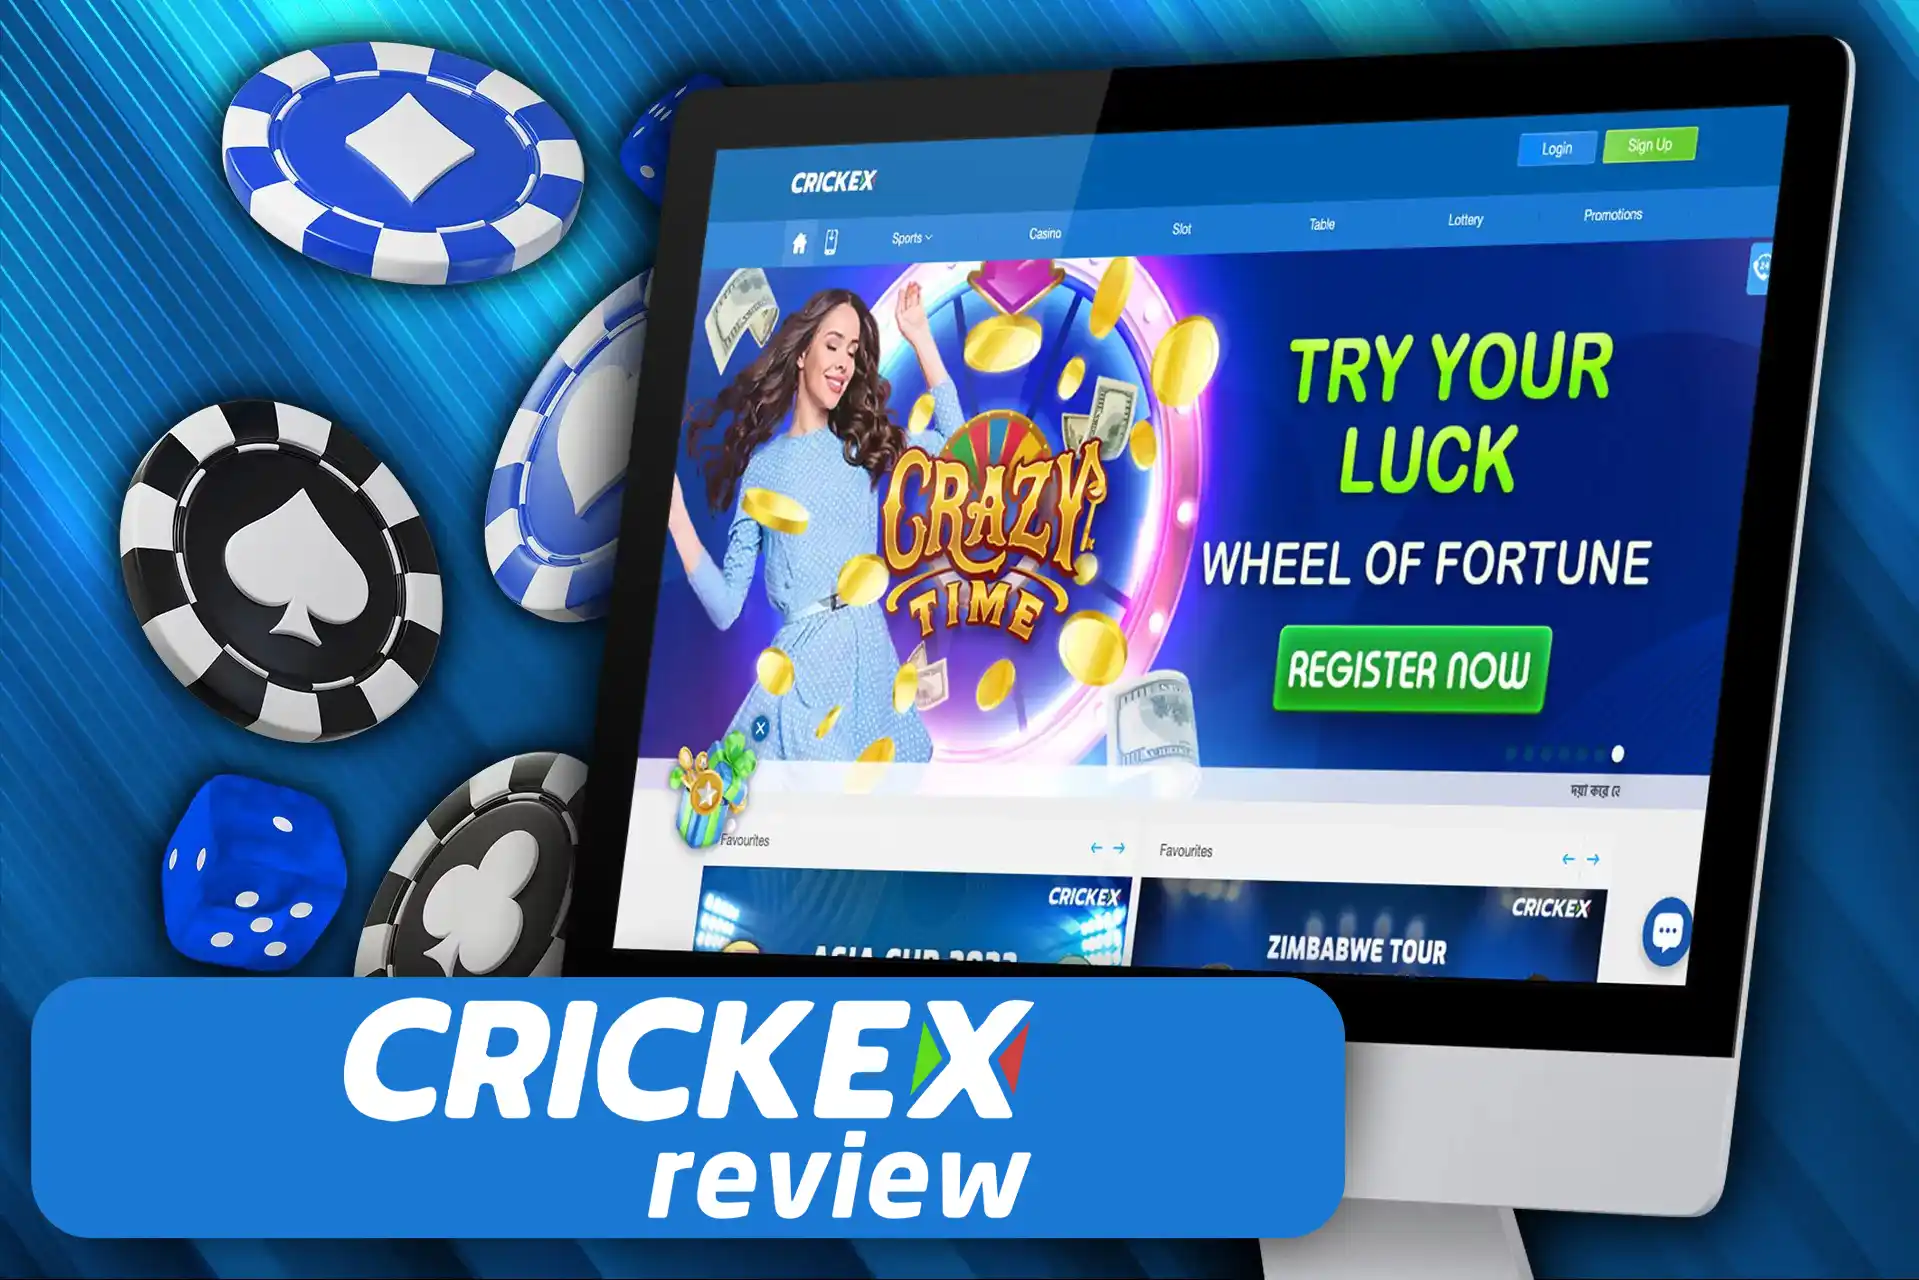 Crickex also has a great desktop version for your PC or laptop.